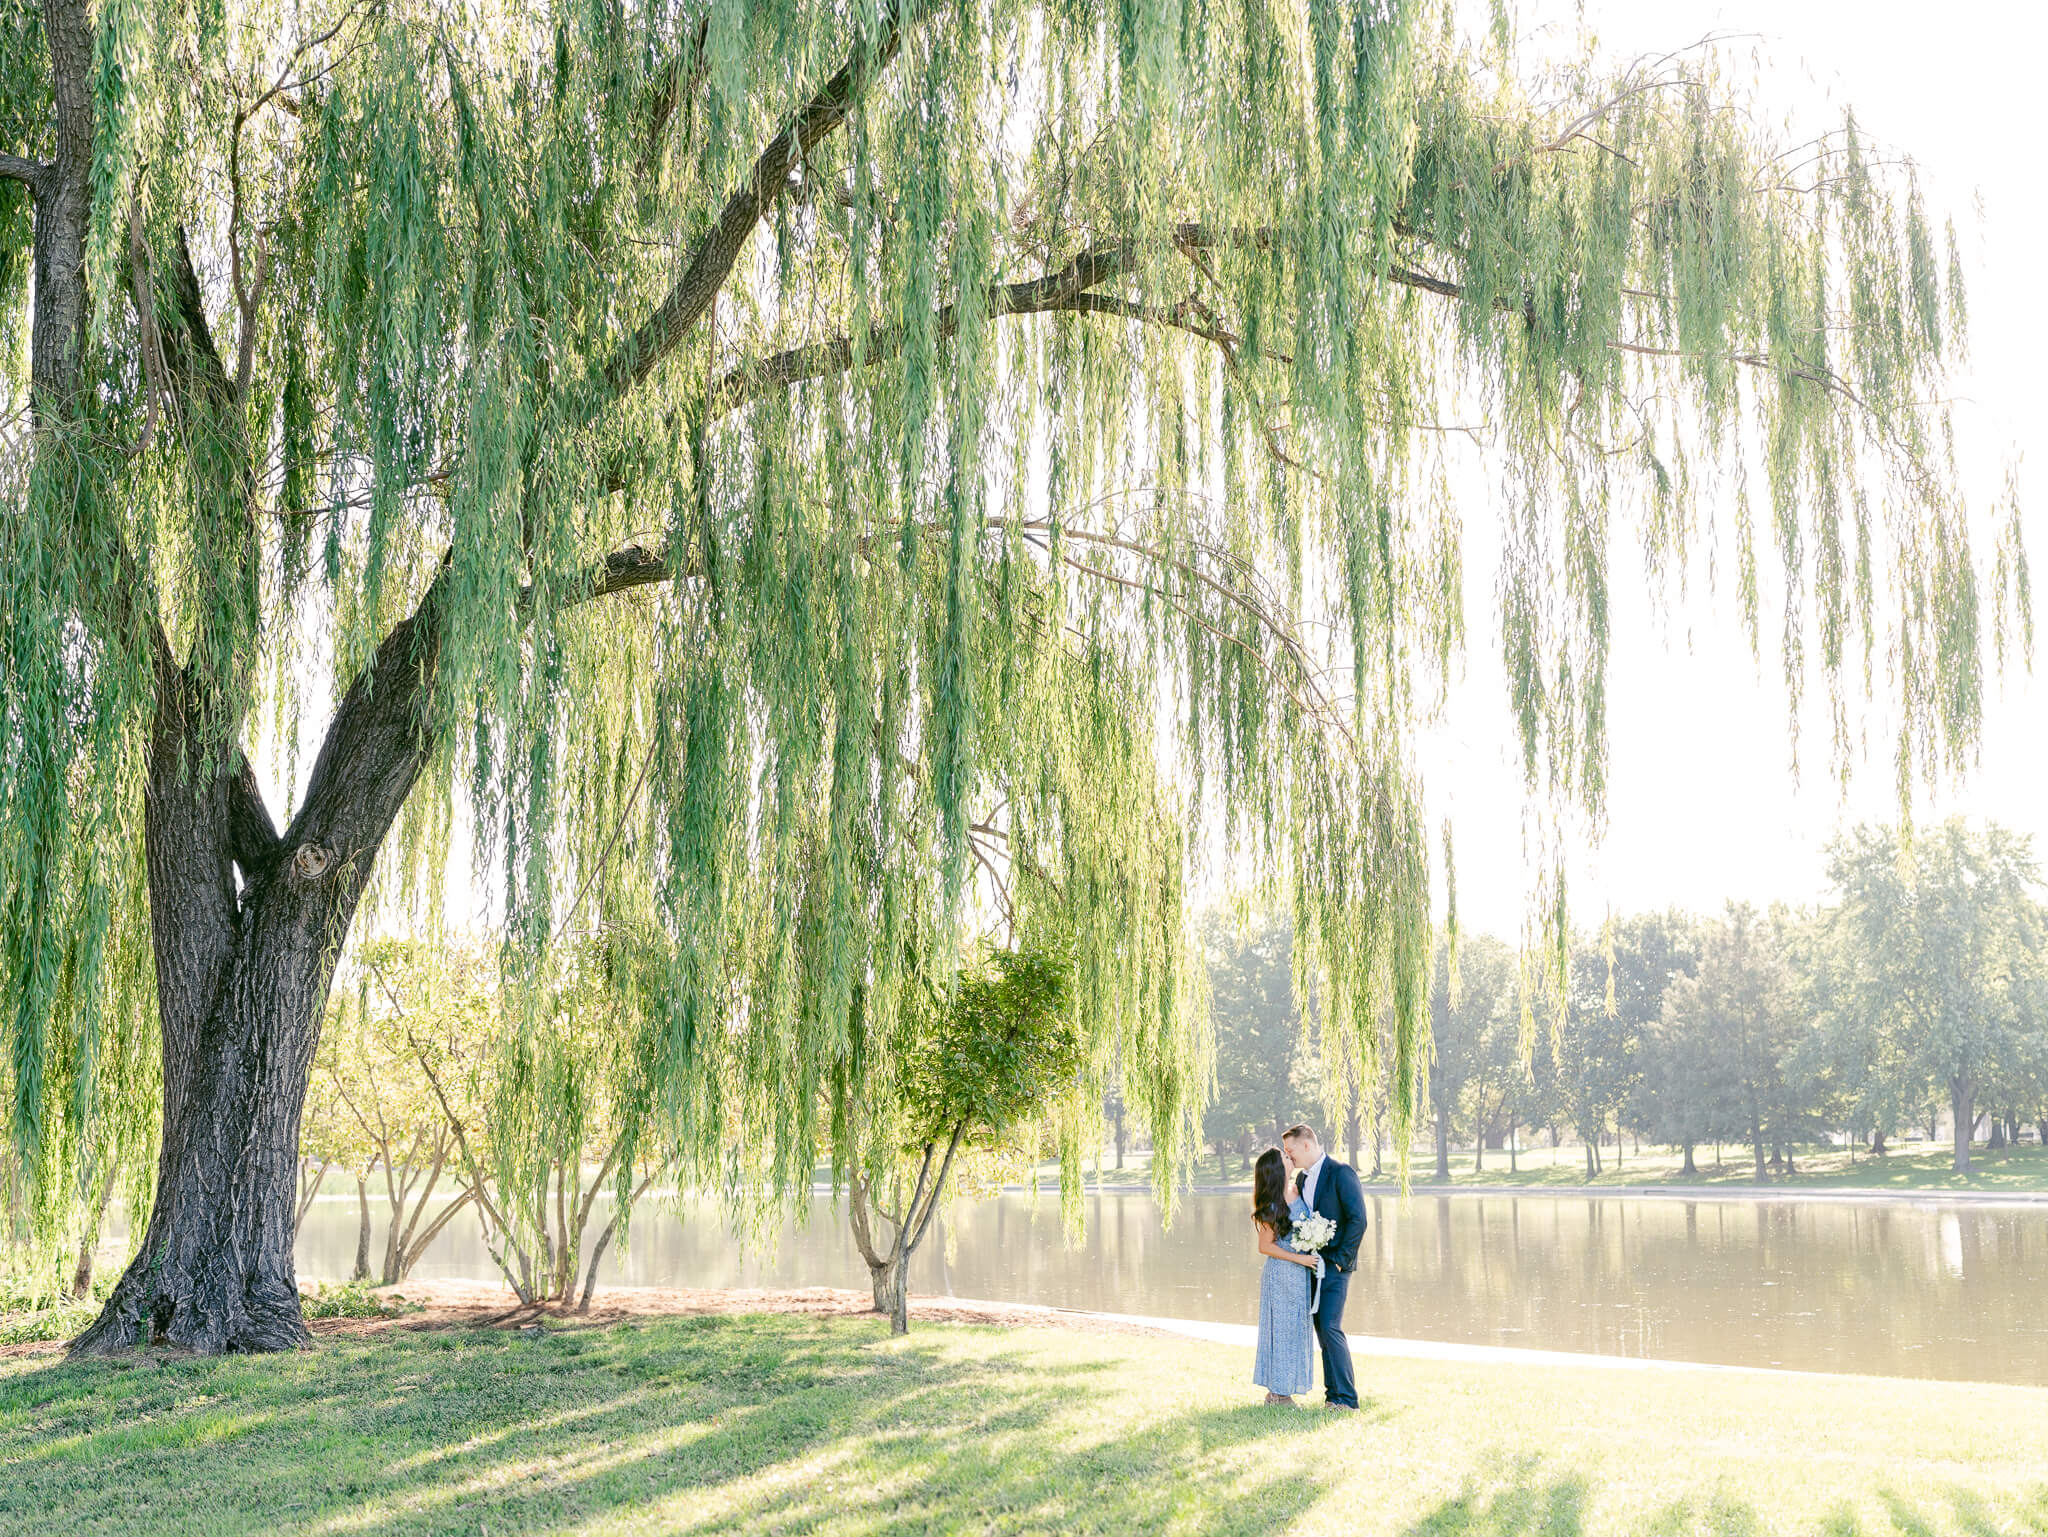 An engaged couple kissing underneath a weeping willow at the D.C. Carp Pond.